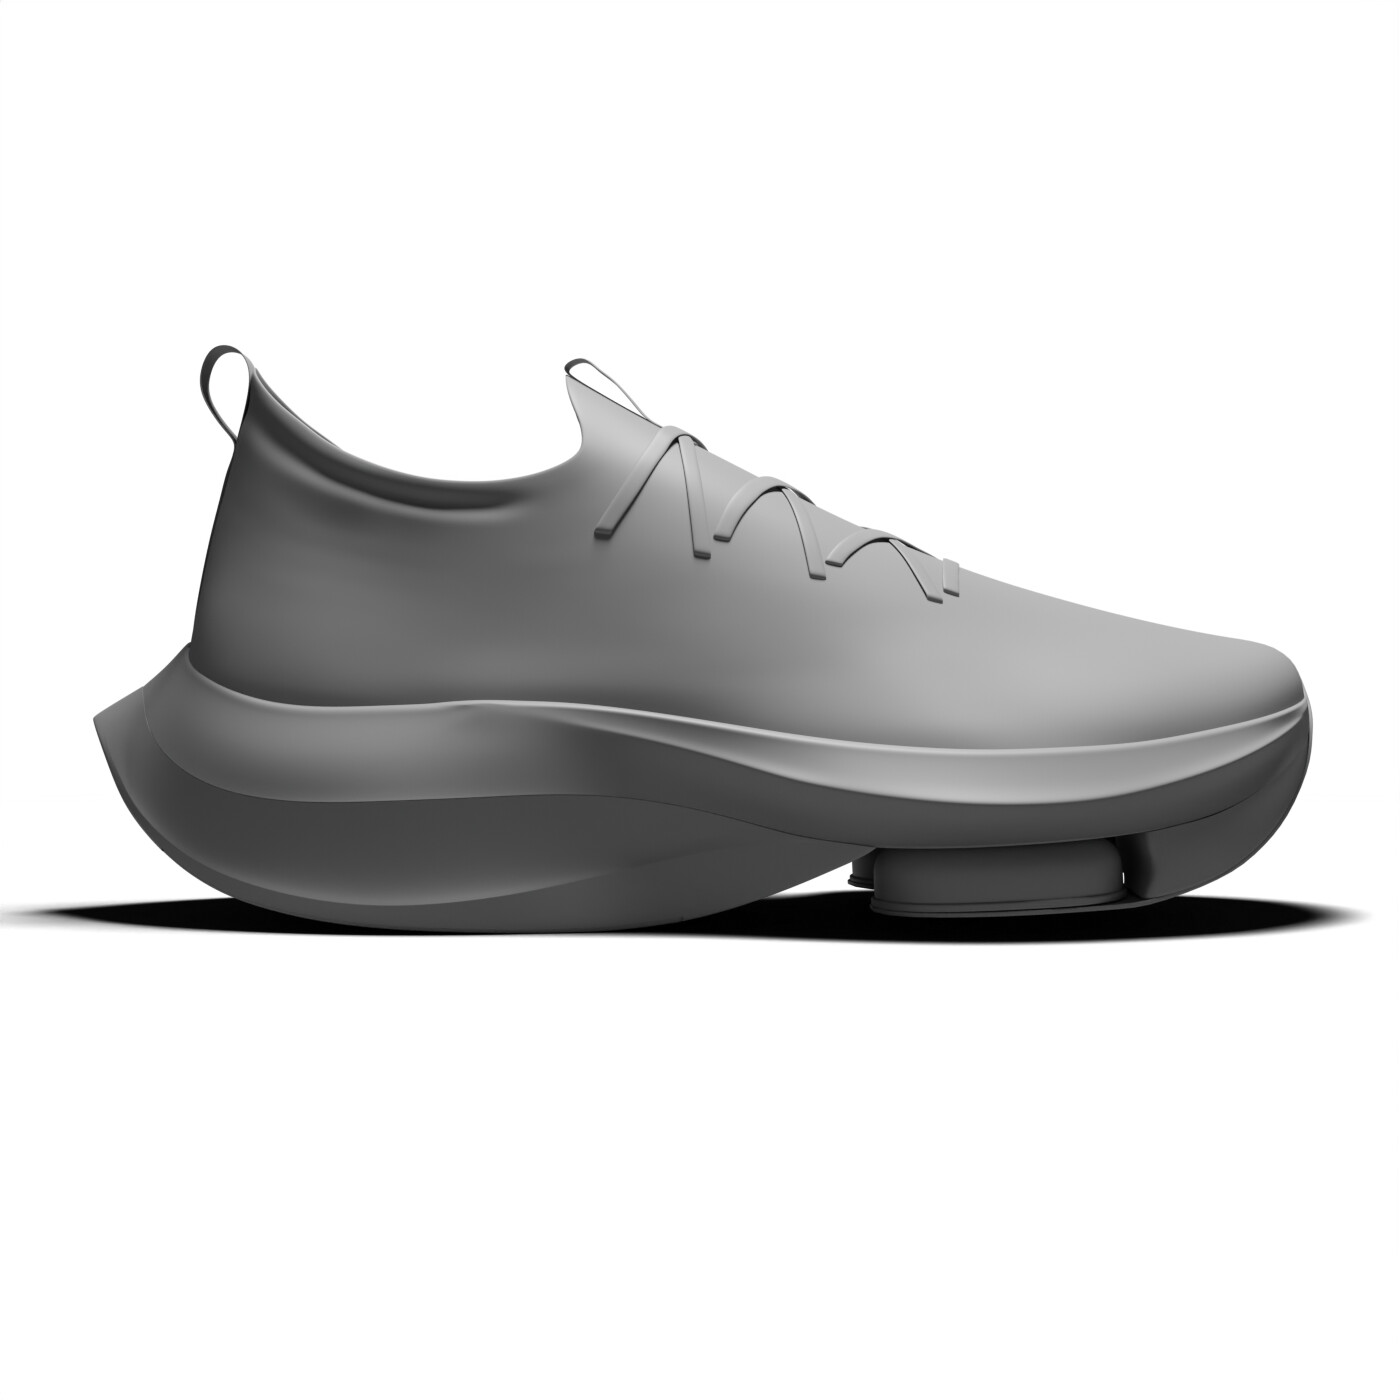 NIKE Air Zoom Alphafly NEXT% Concept - Finished Projects - Blender ...